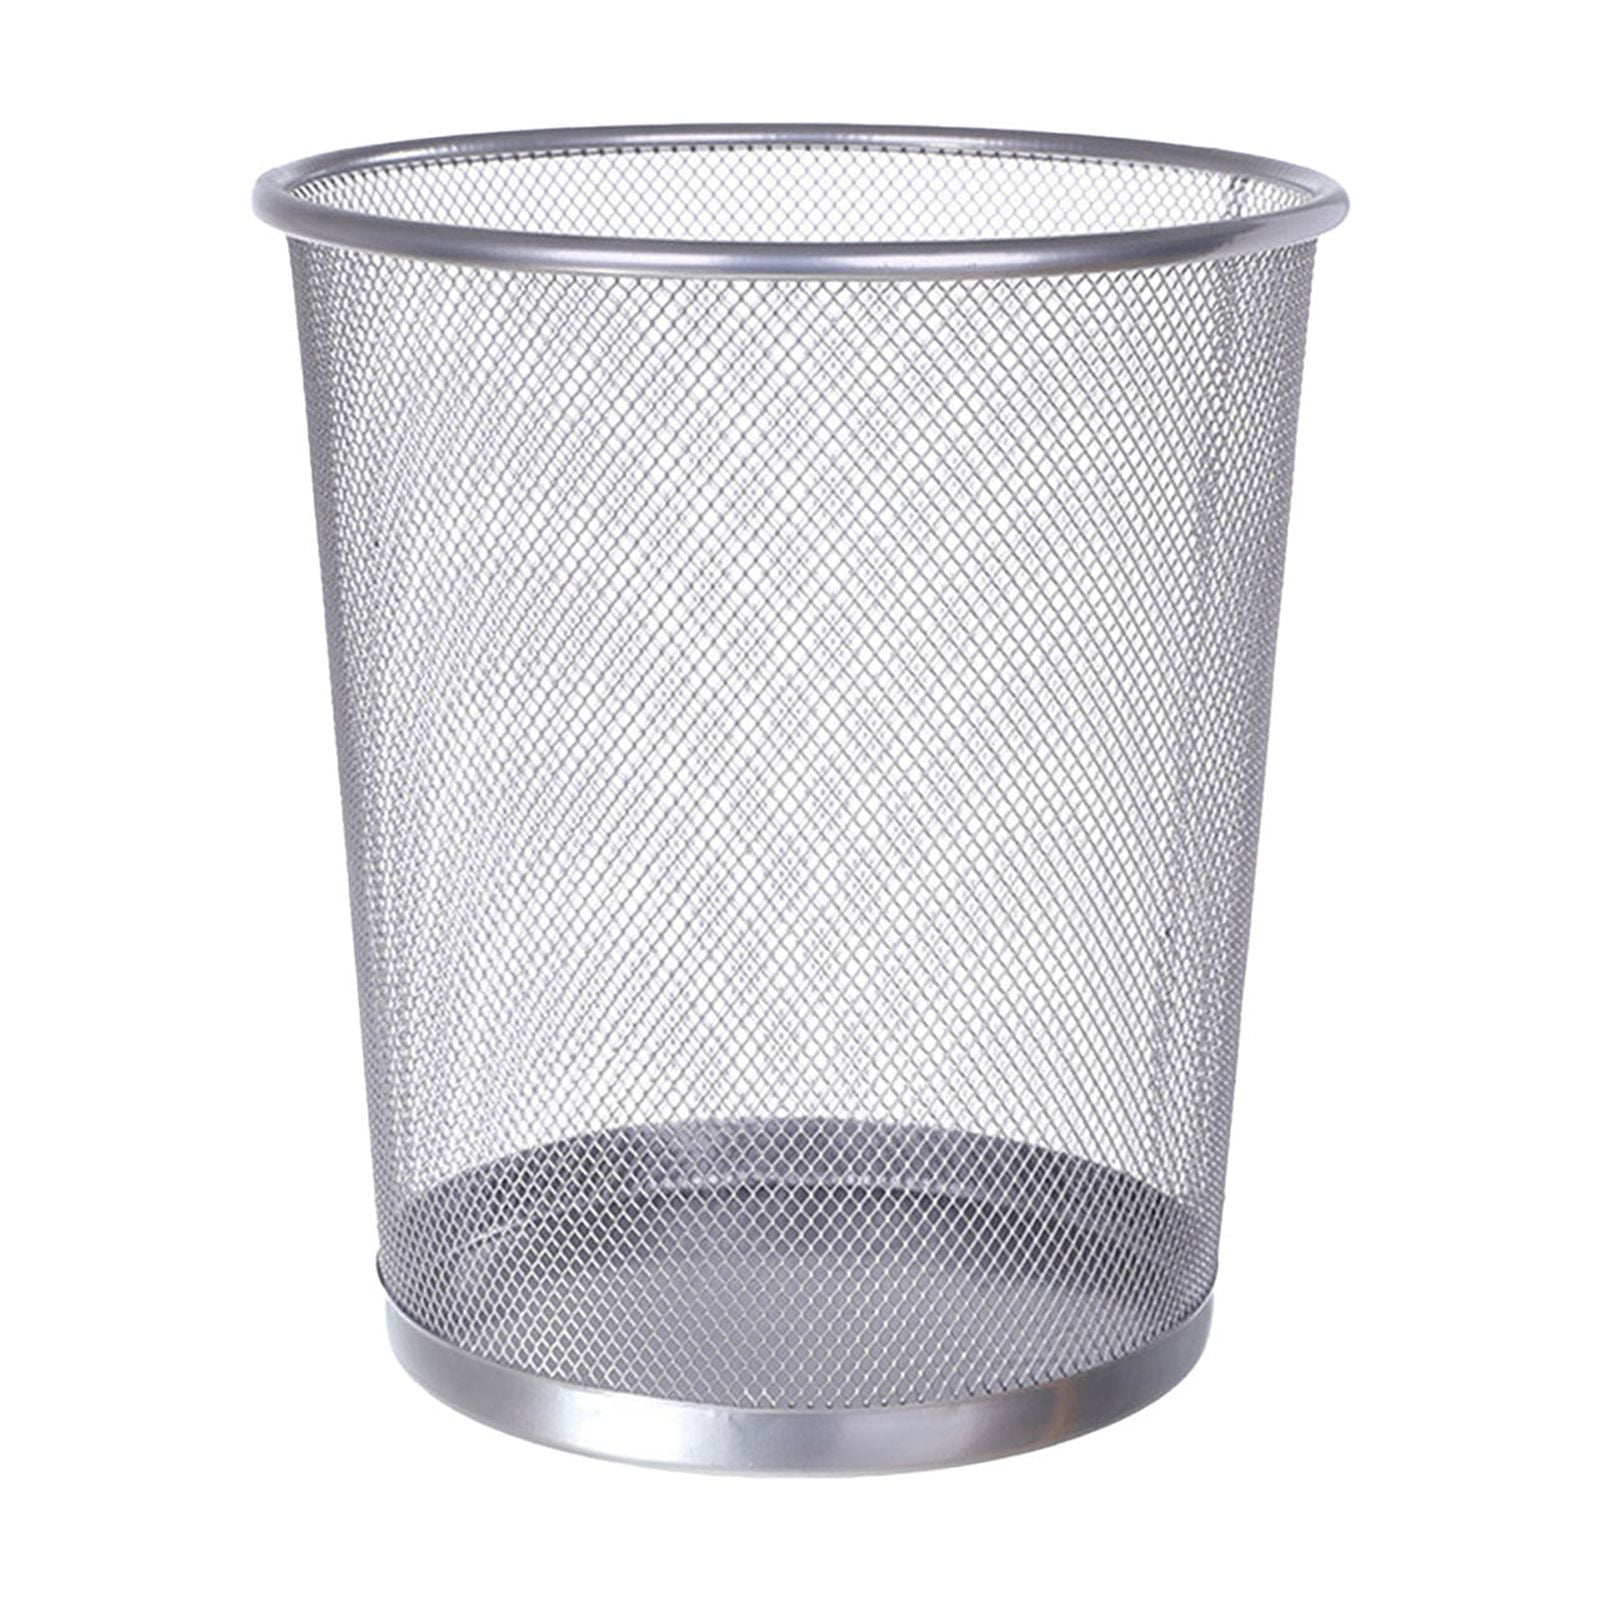 Harlier Small Trash Cans for Home or Office, 4.5 Gallon White Mesh ...